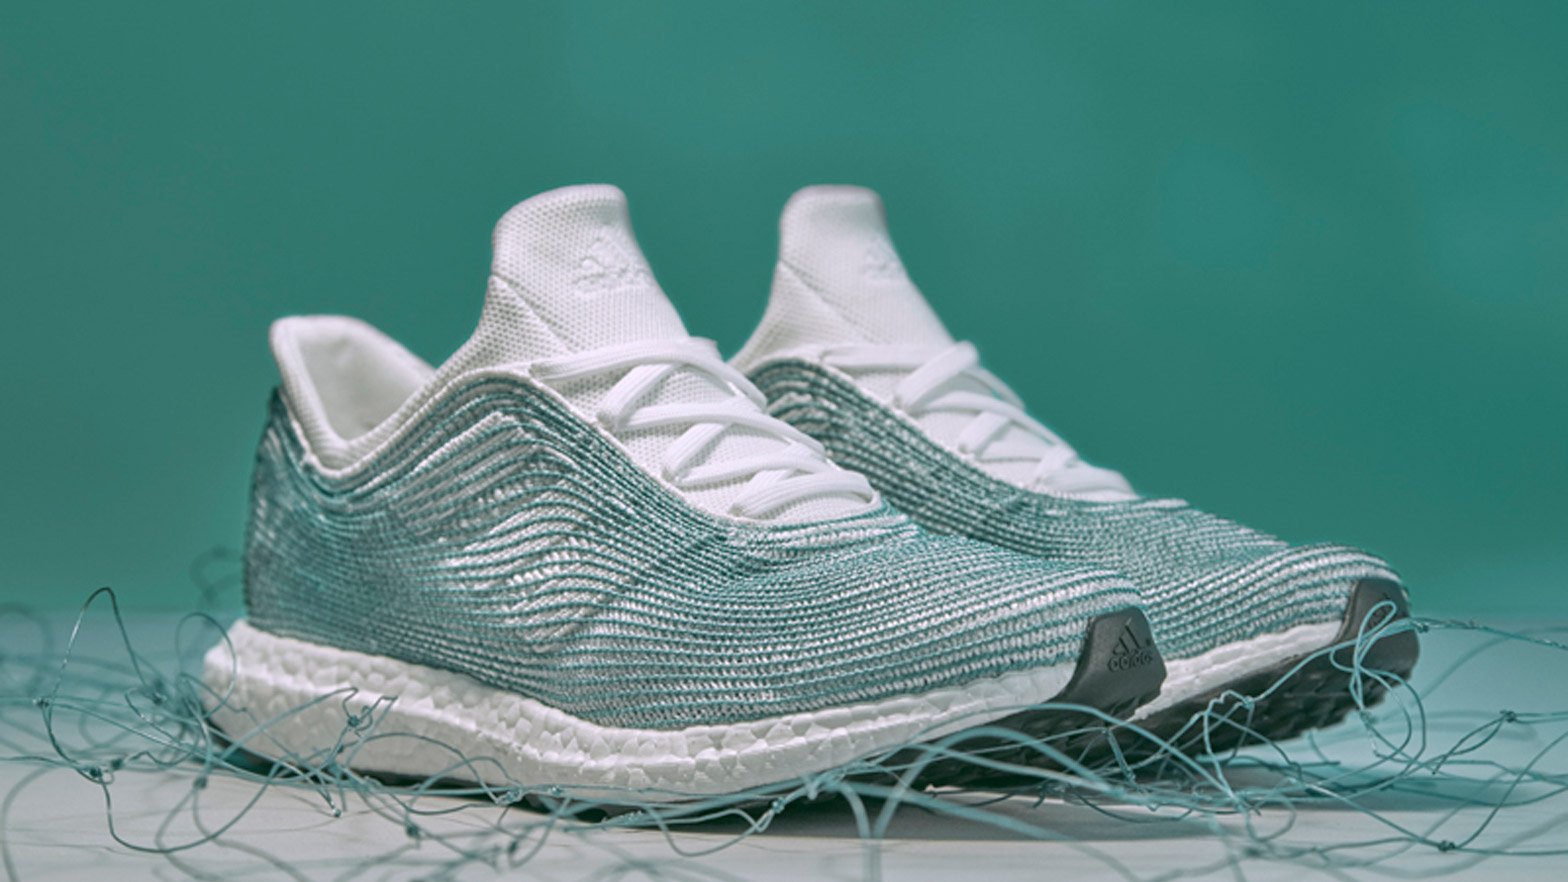 insecto Simular Dictar Adidas x Parley shoes made from recycled ocean plastic launch